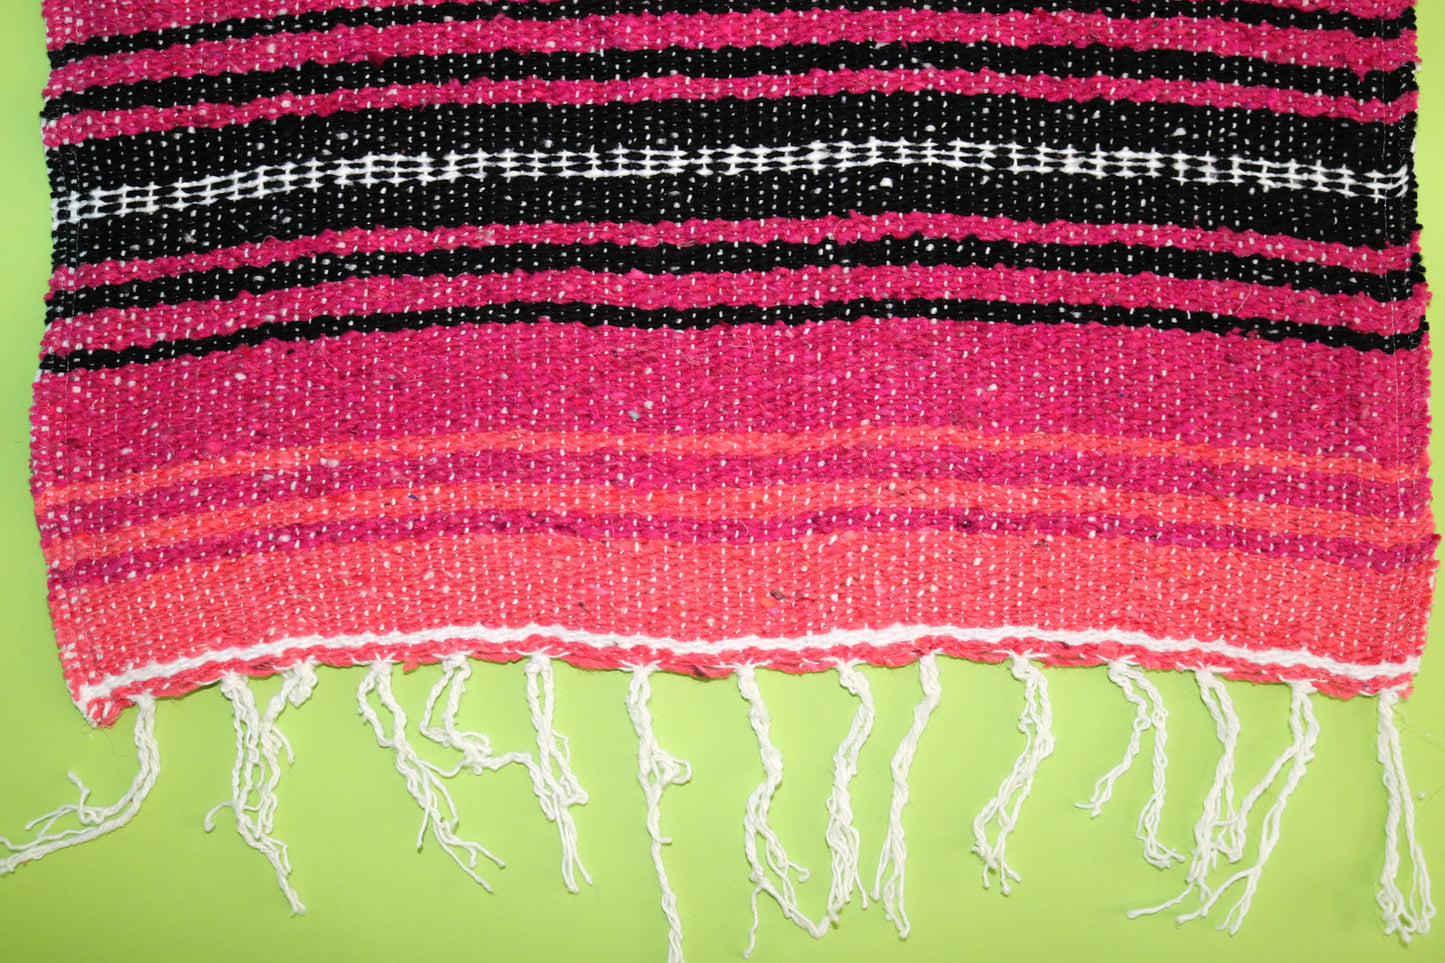 Mexican Rustic Pink Table Runner made from Falsa Blankets